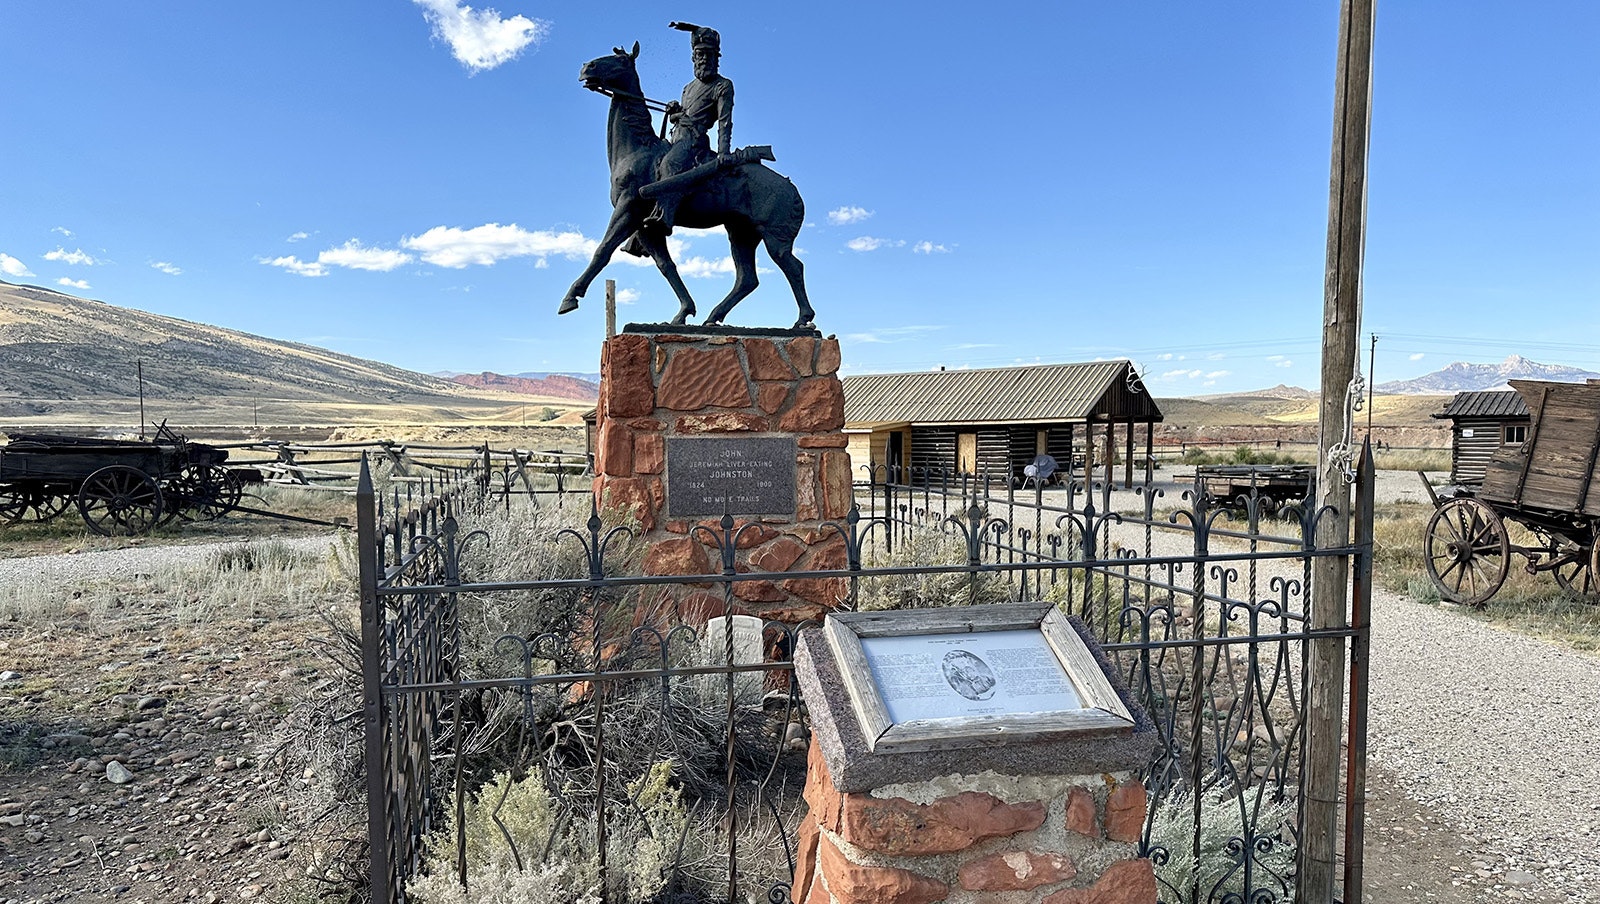 The grave of Jeremiah "Liver Eating" Johnson at Old Trail Town. Johnson's remains were exhumed in California and reburied in Cody in 1974. His funeral attracted over 2,000 people, including actor Robert Redford, making it one of the largest in state history.